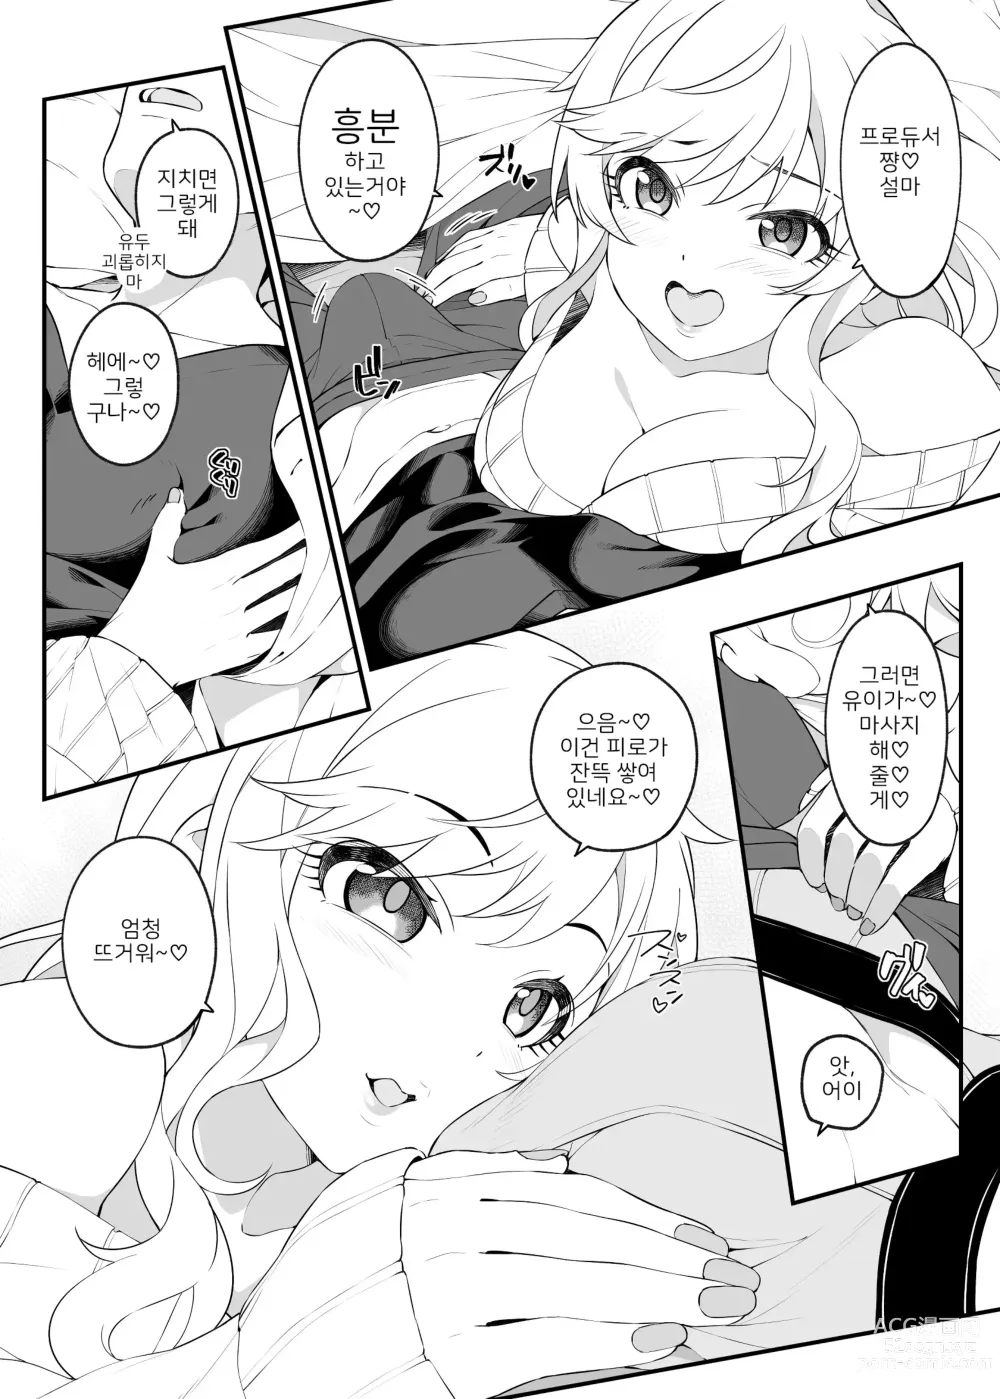 Page 5 of doujinshi Torima Pakocchao - You dont have to think about difficult things, do you?